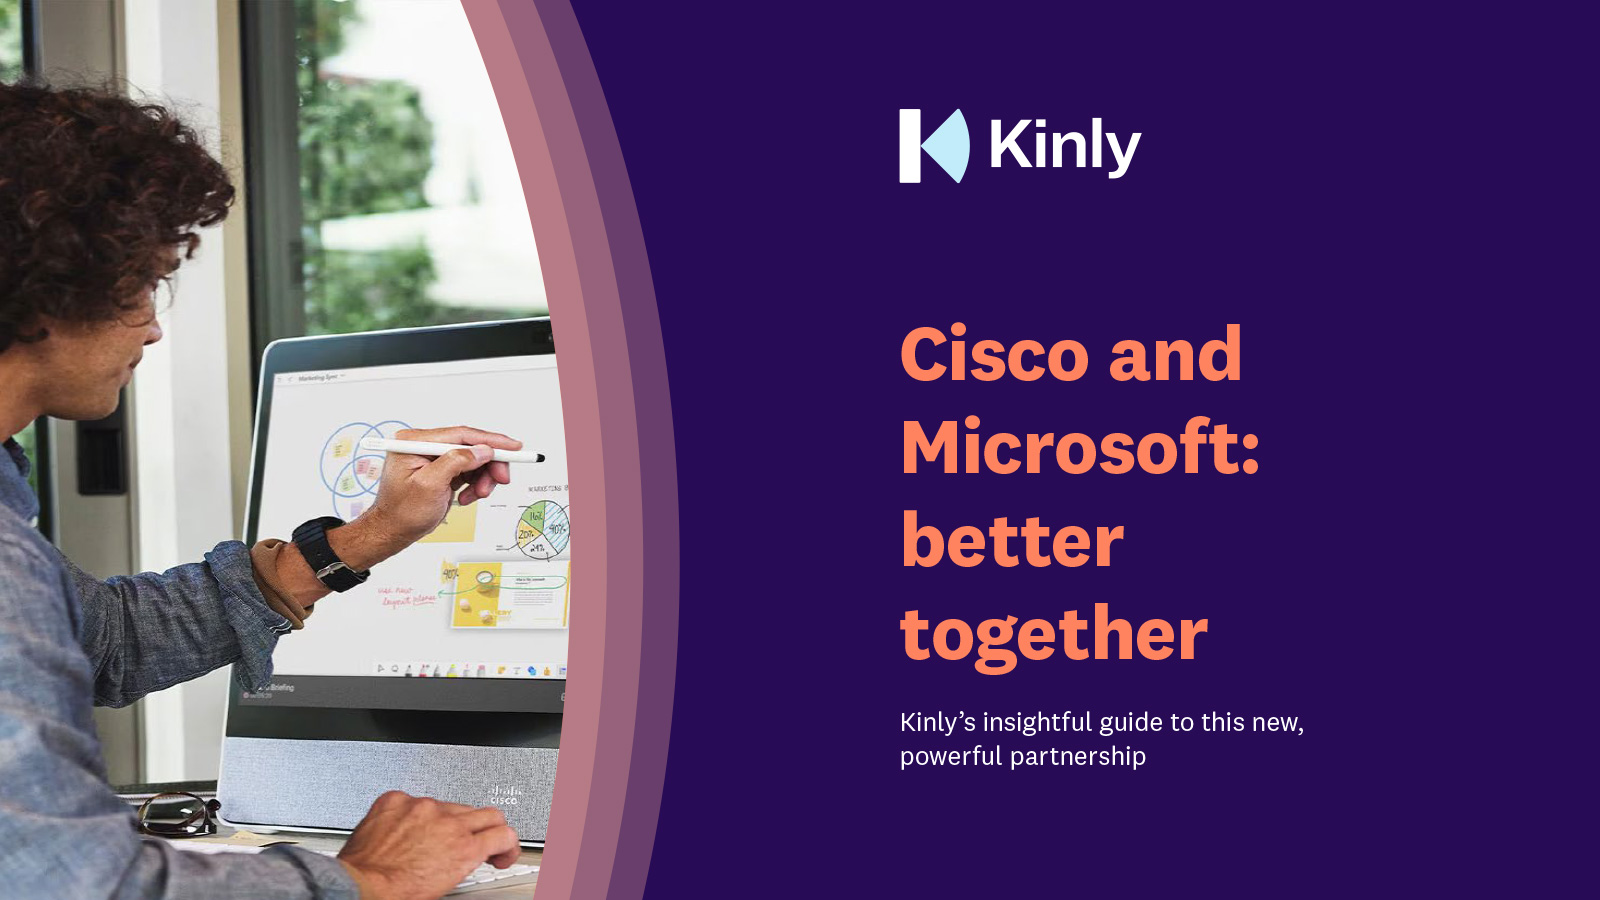 Cisco and Microsoft: better together